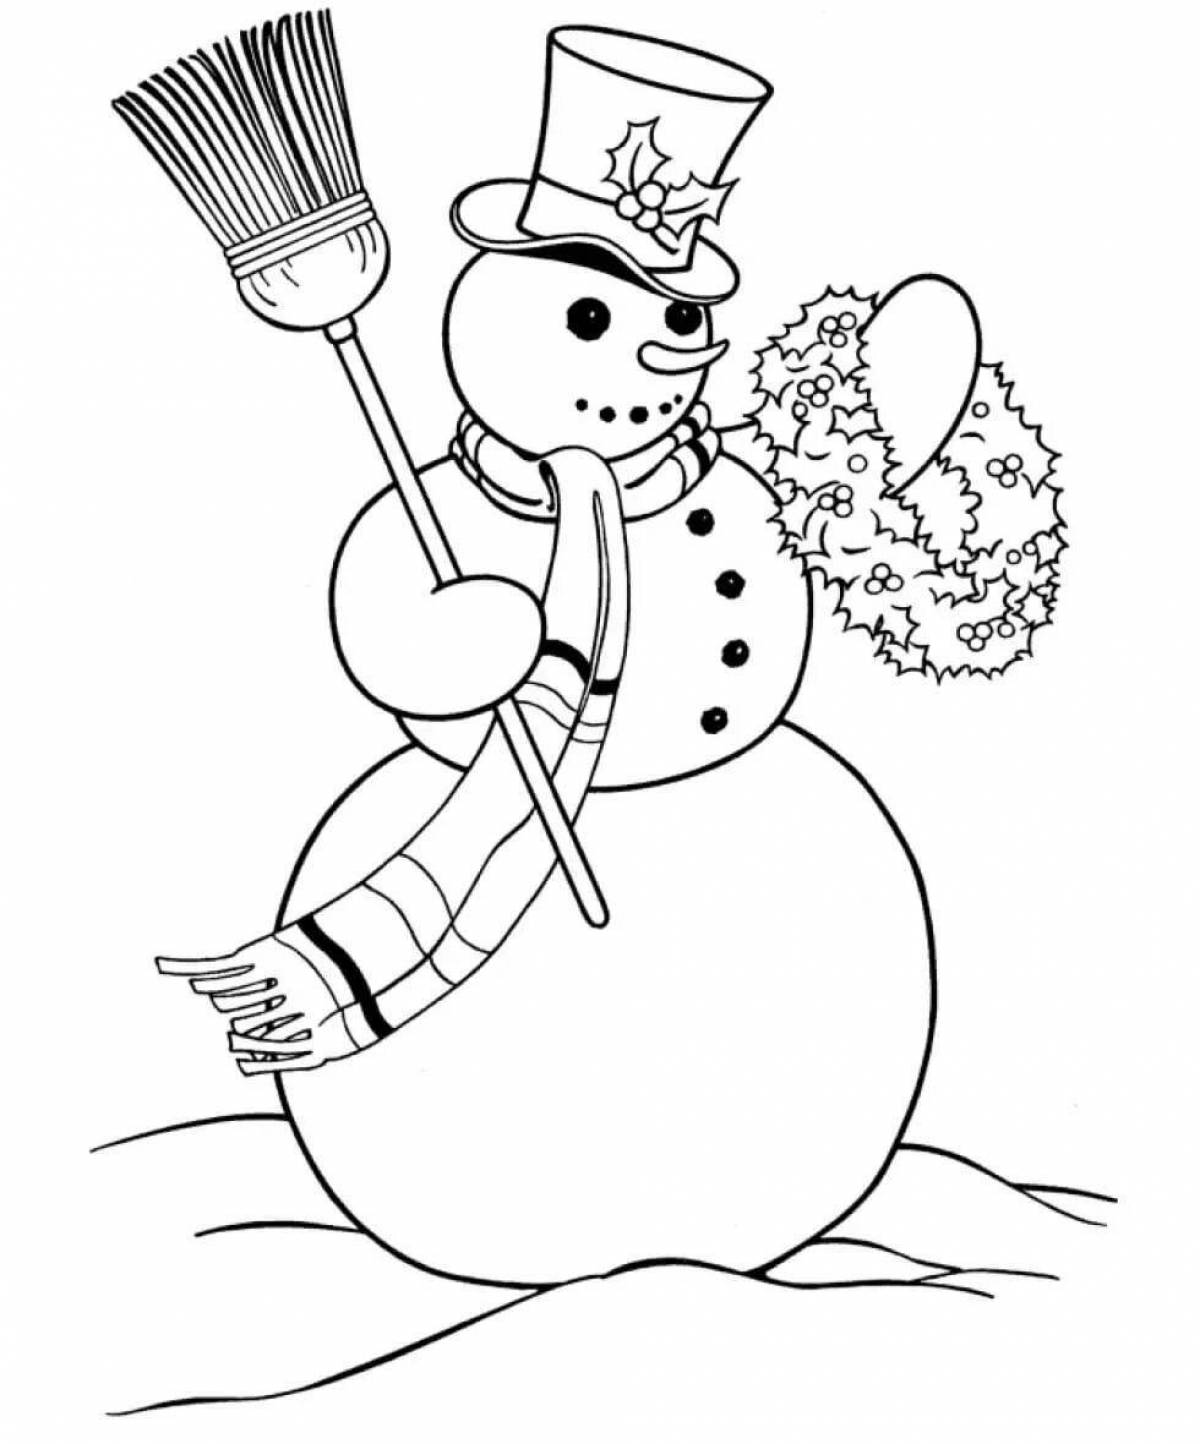 Adorable snowman's day coloring page